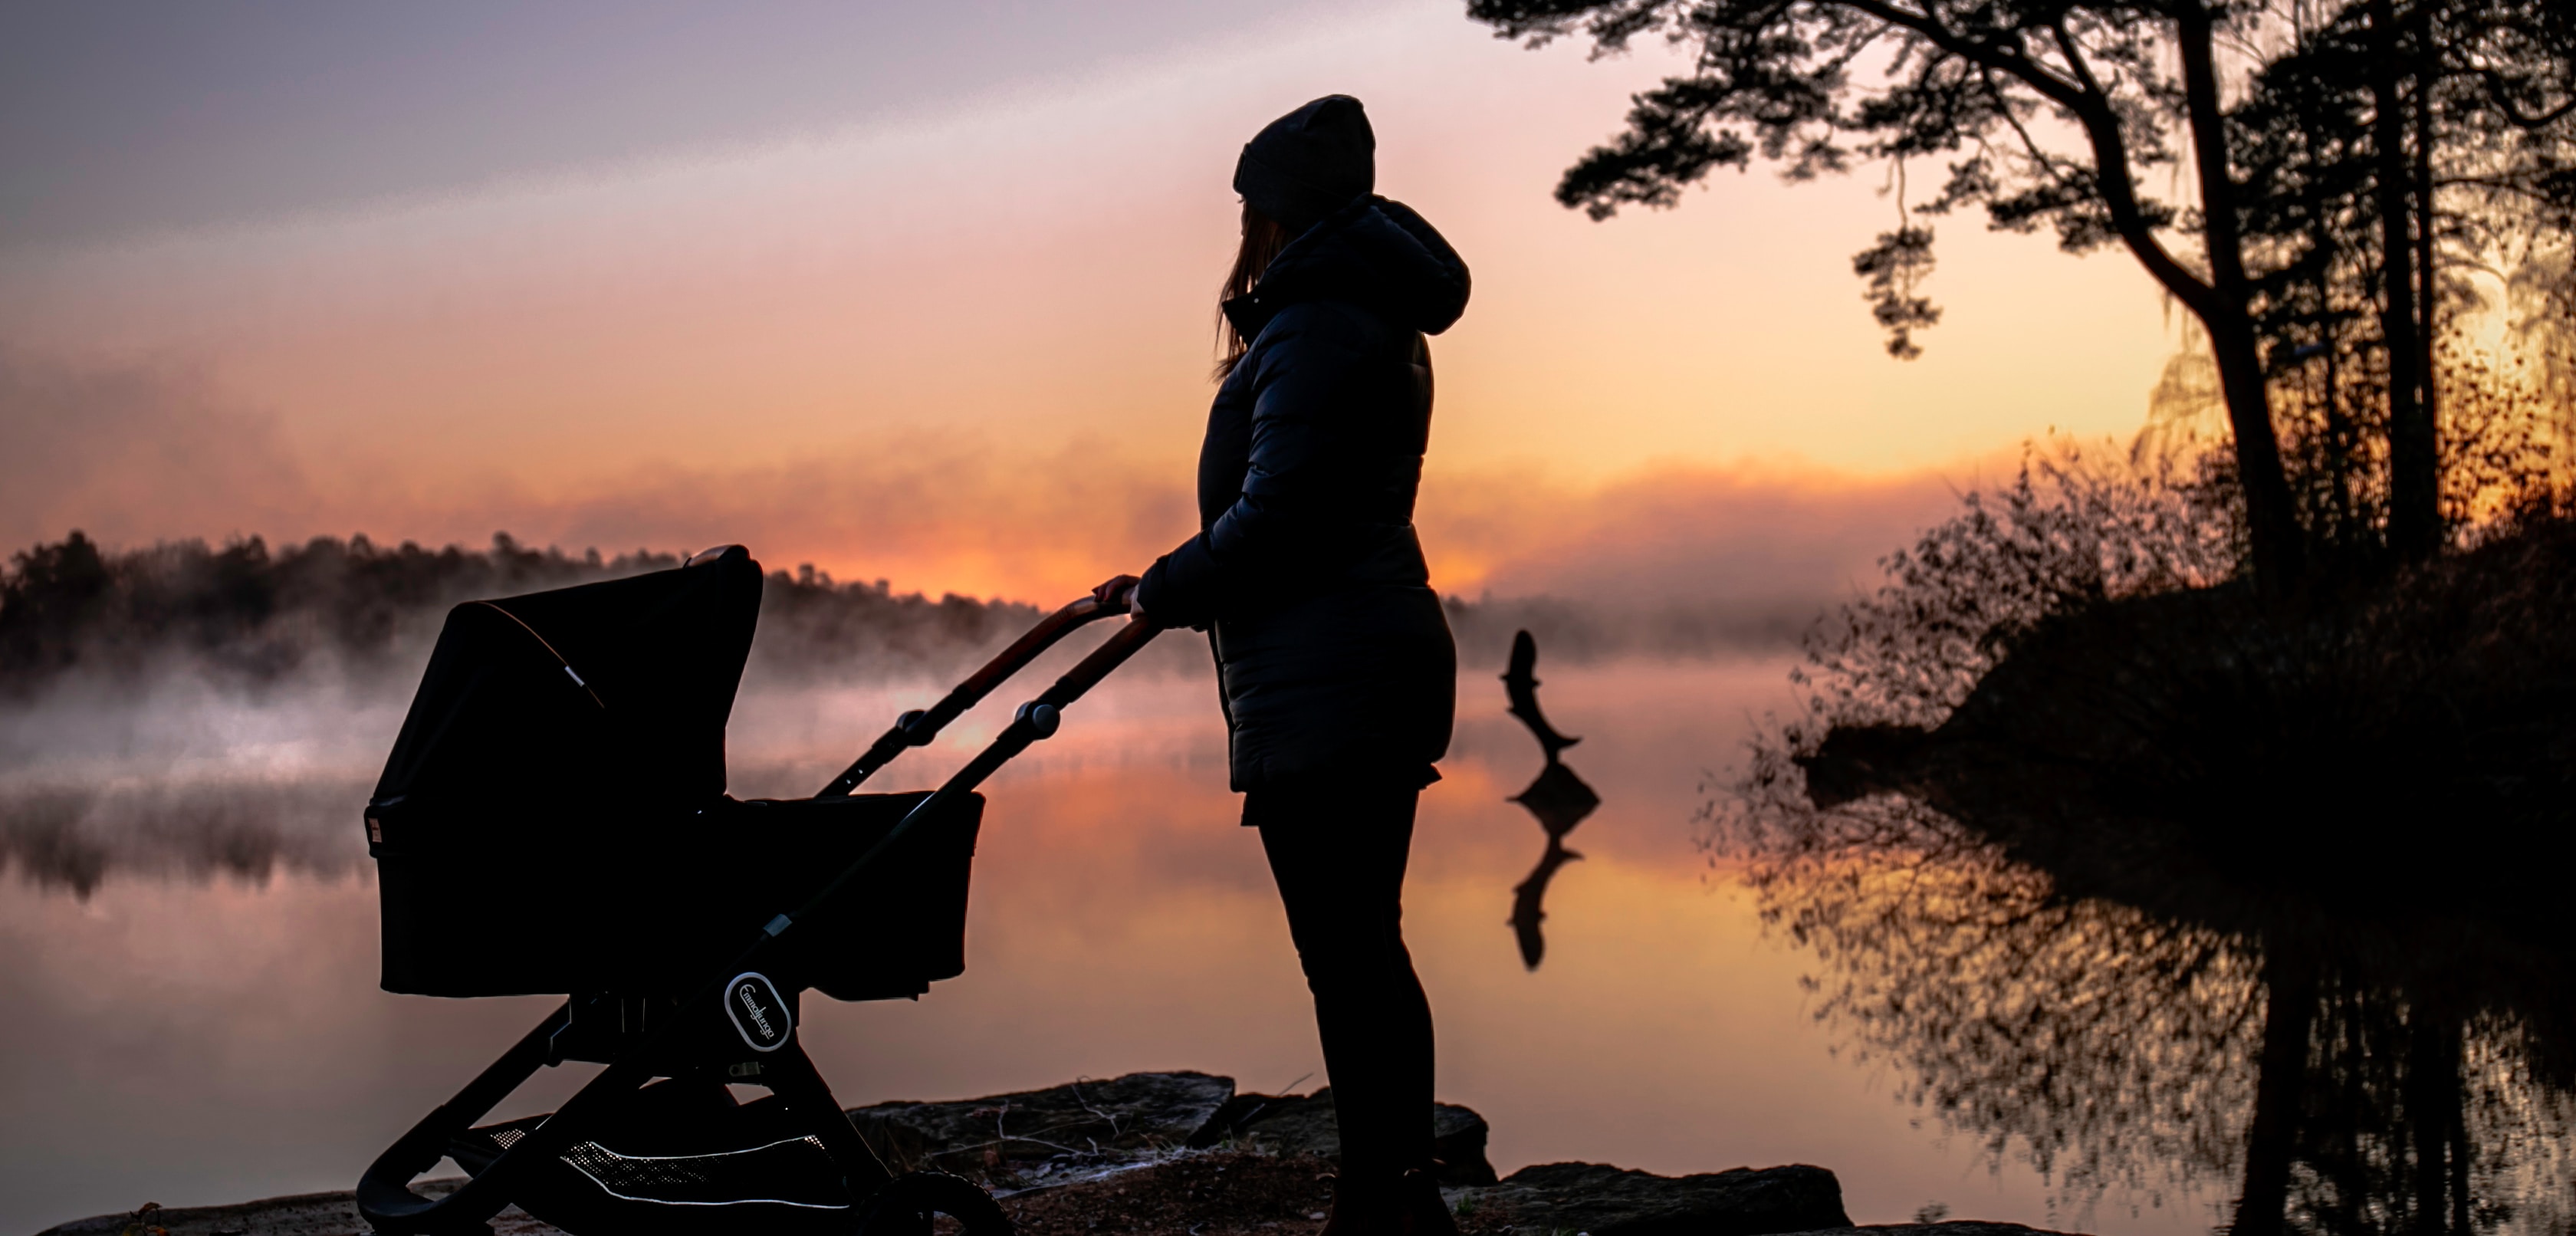 what to look for in a stroller